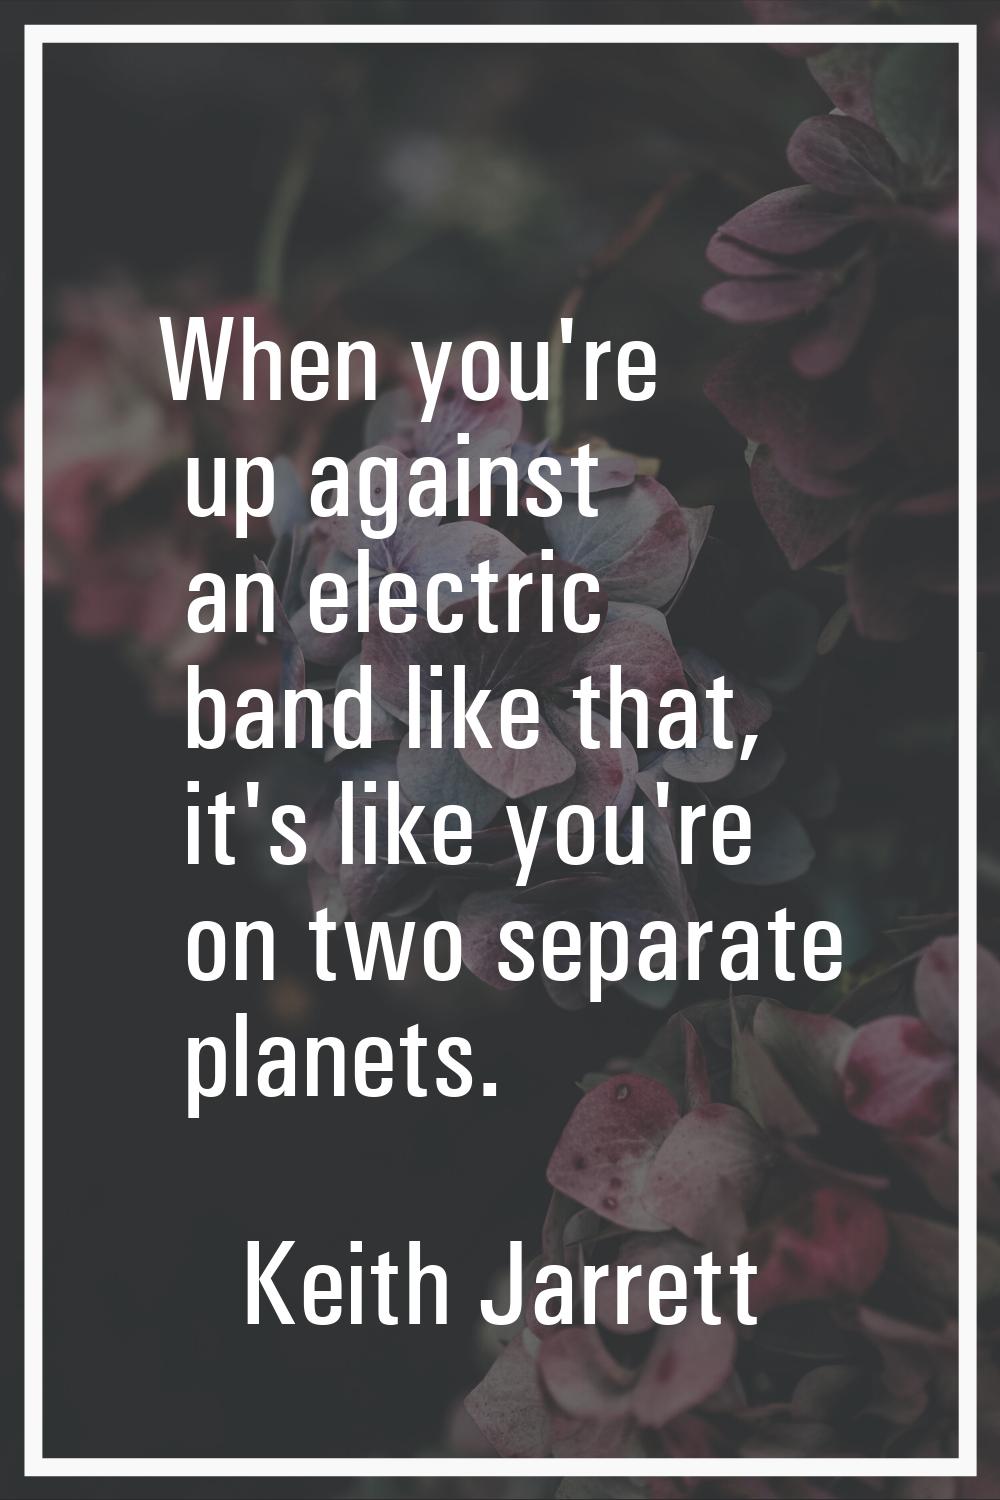 When you're up against an electric band like that, it's like you're on two separate planets.